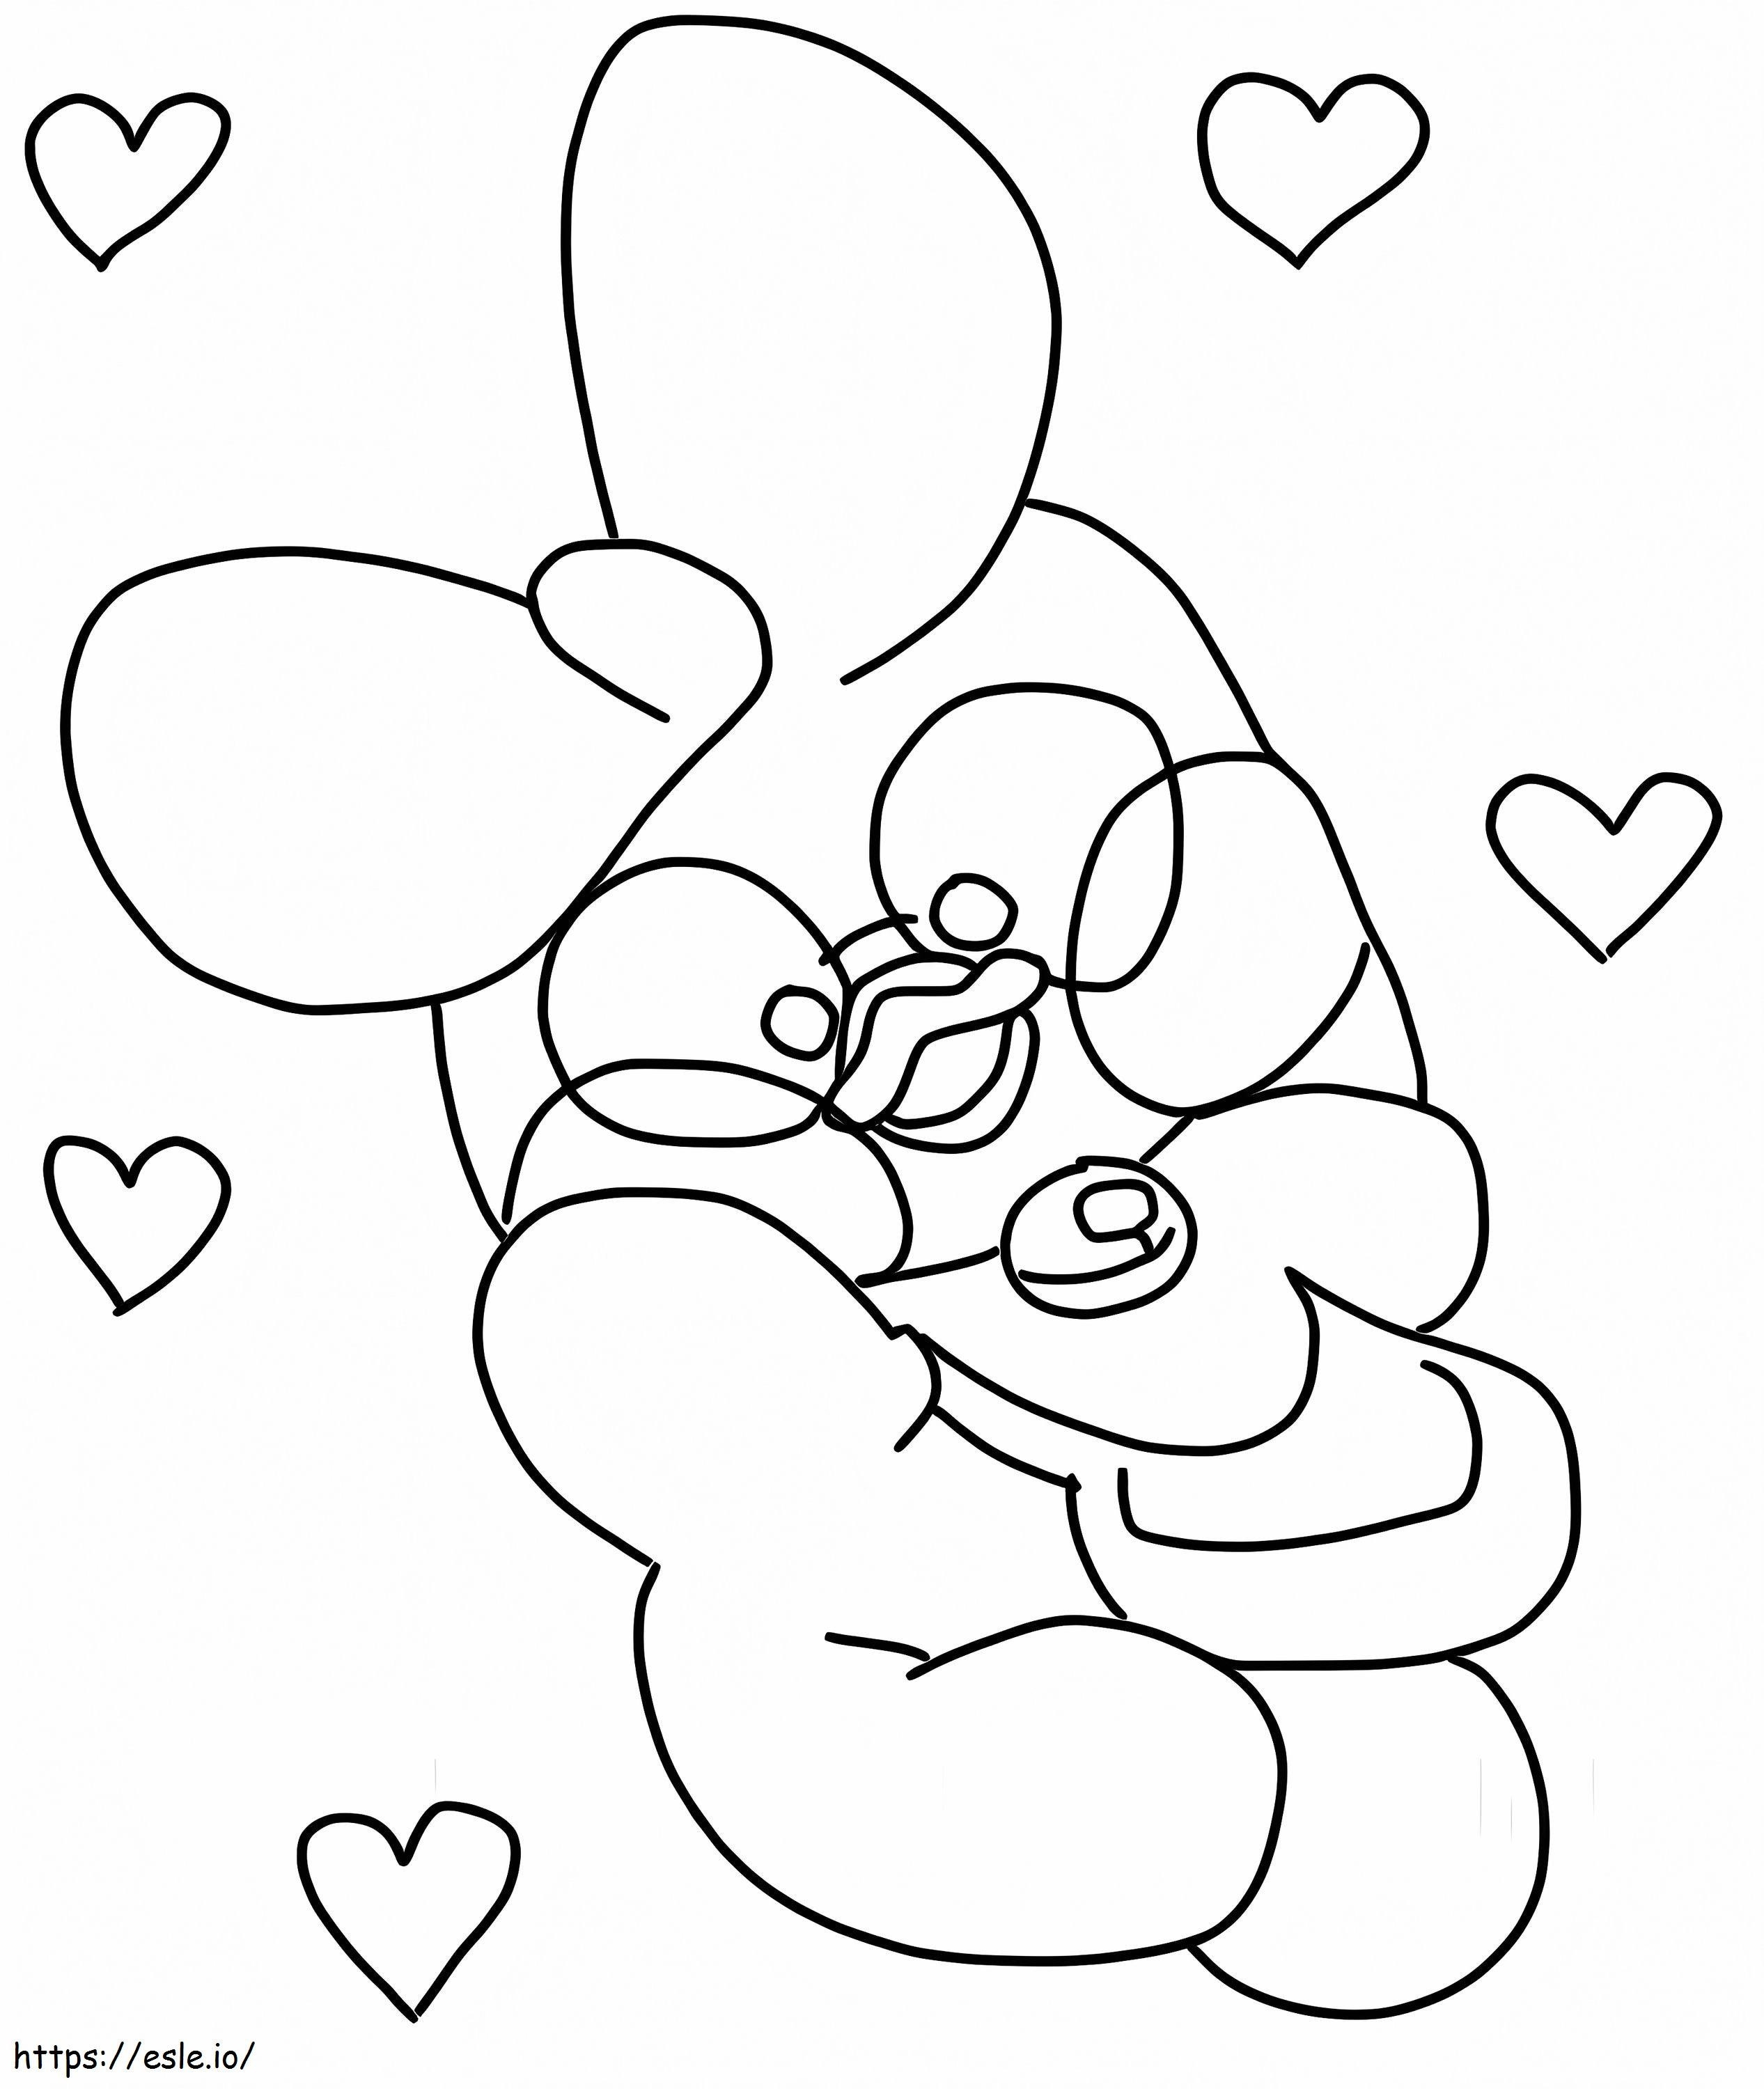 Lovely Lalafanfan Duck coloring page